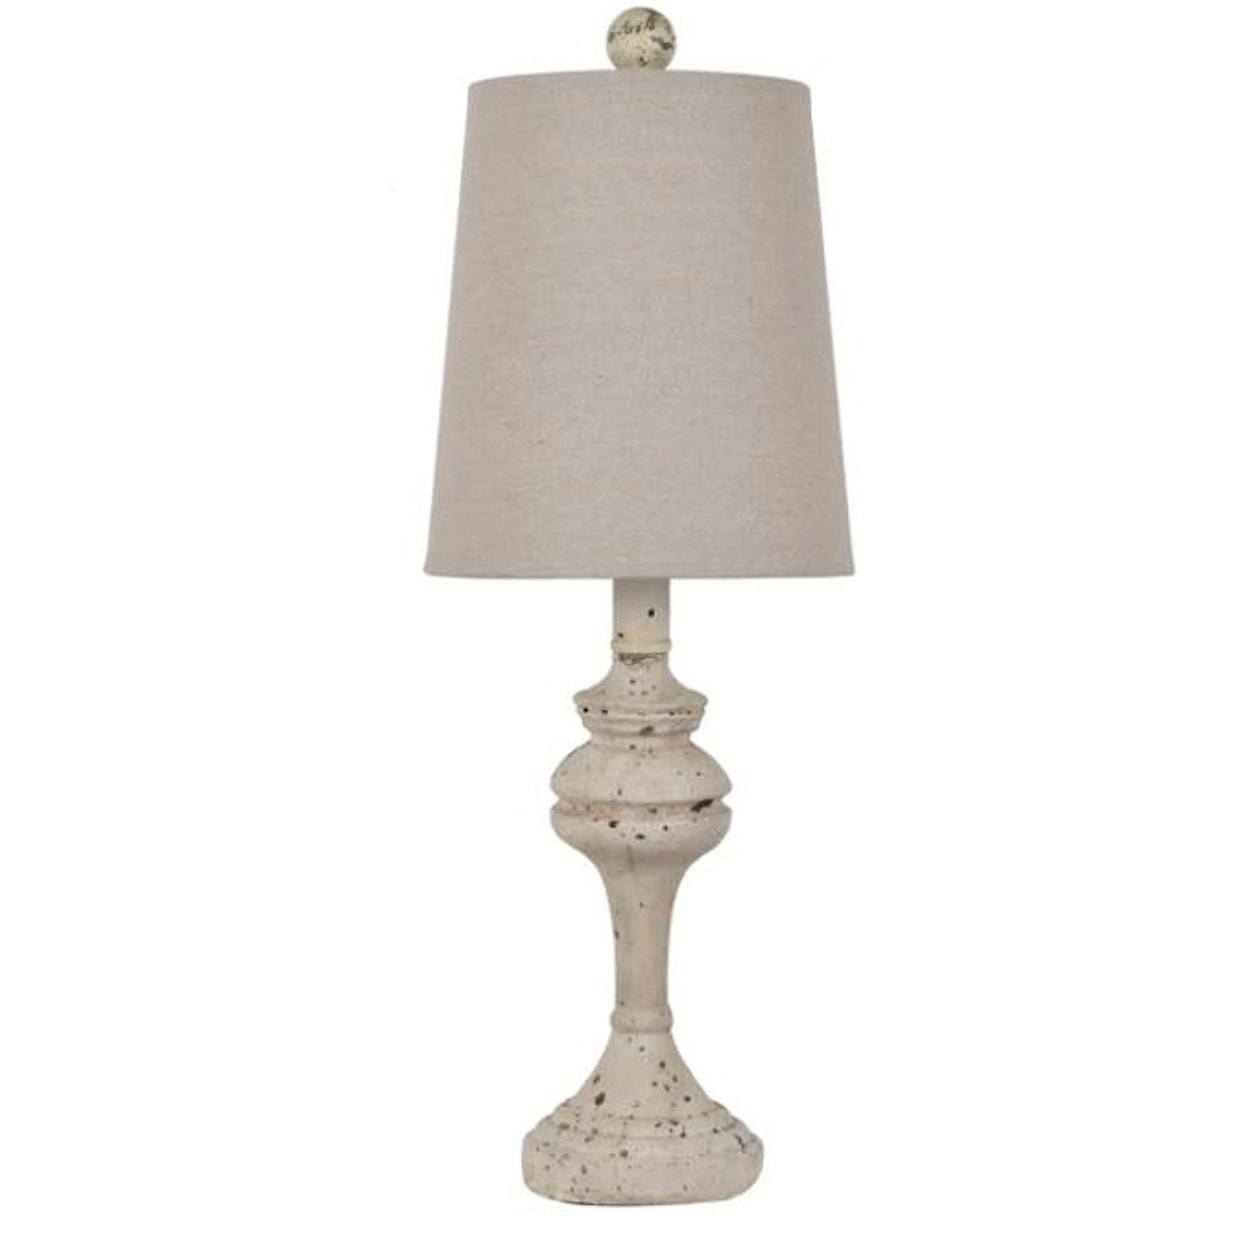 Crestview Collection Lighting Nicolle Table Lamp